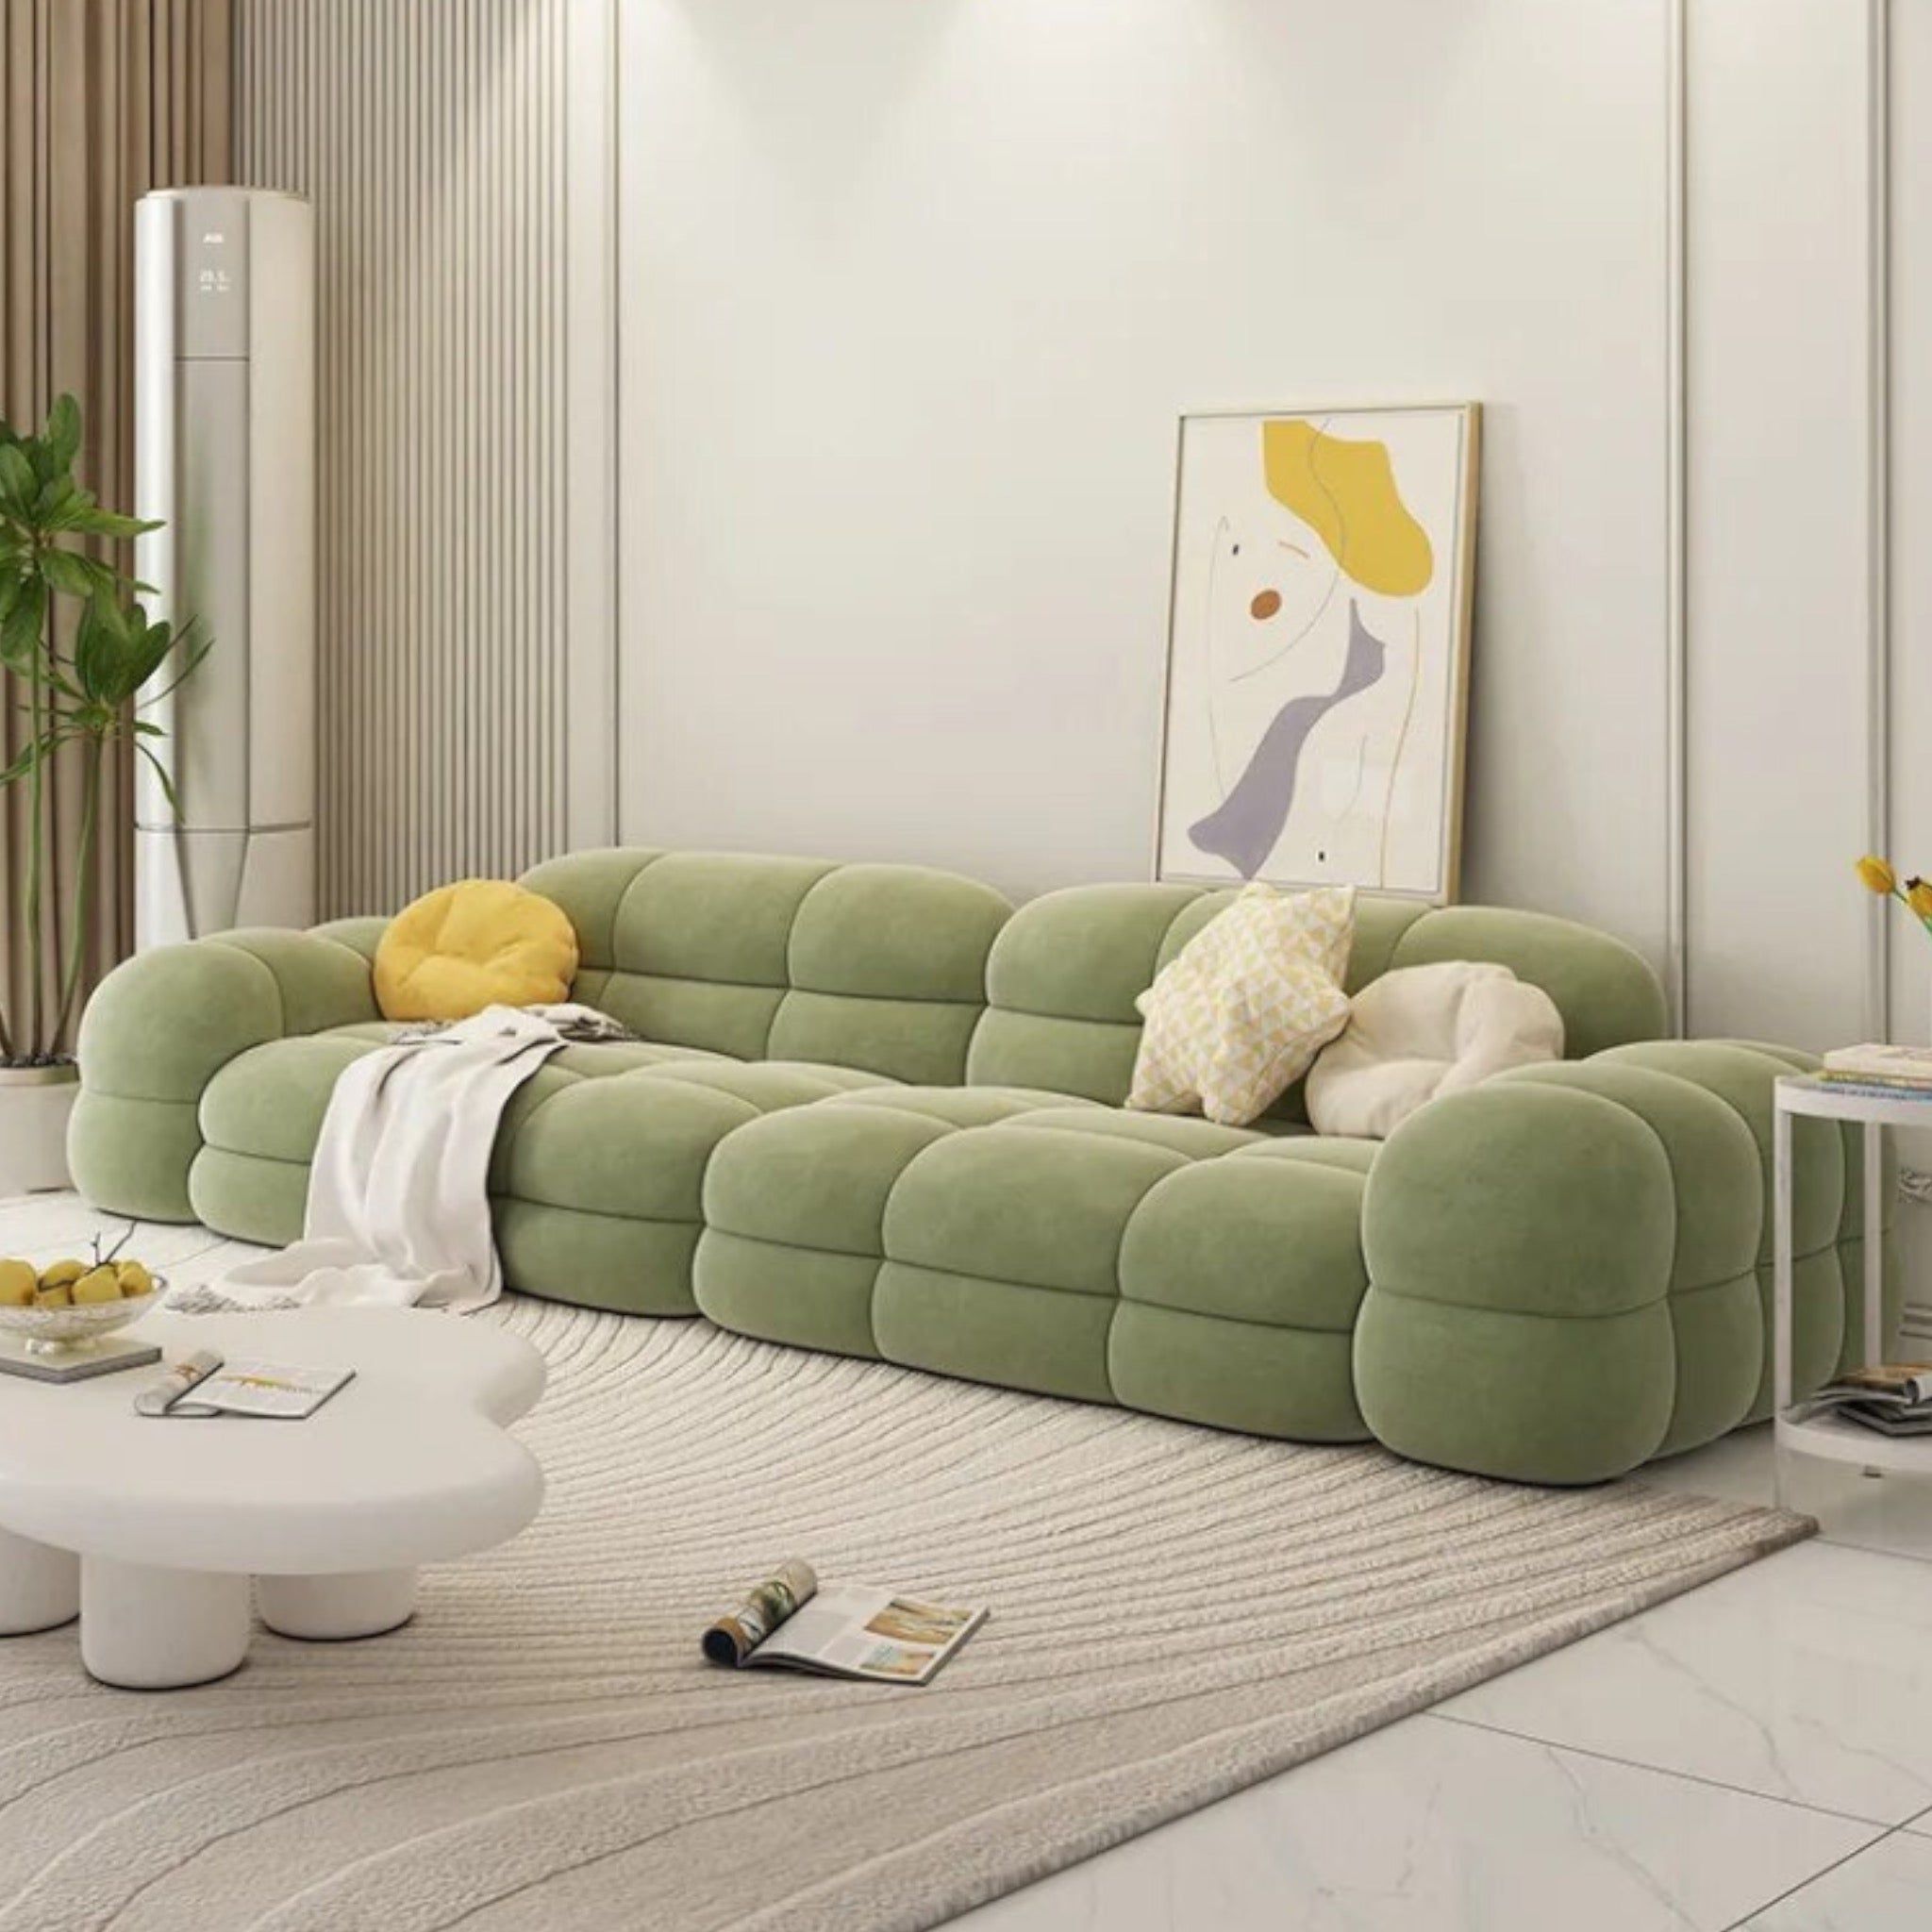 Modular Sectional Sofa for the Comfort of Your Gathering